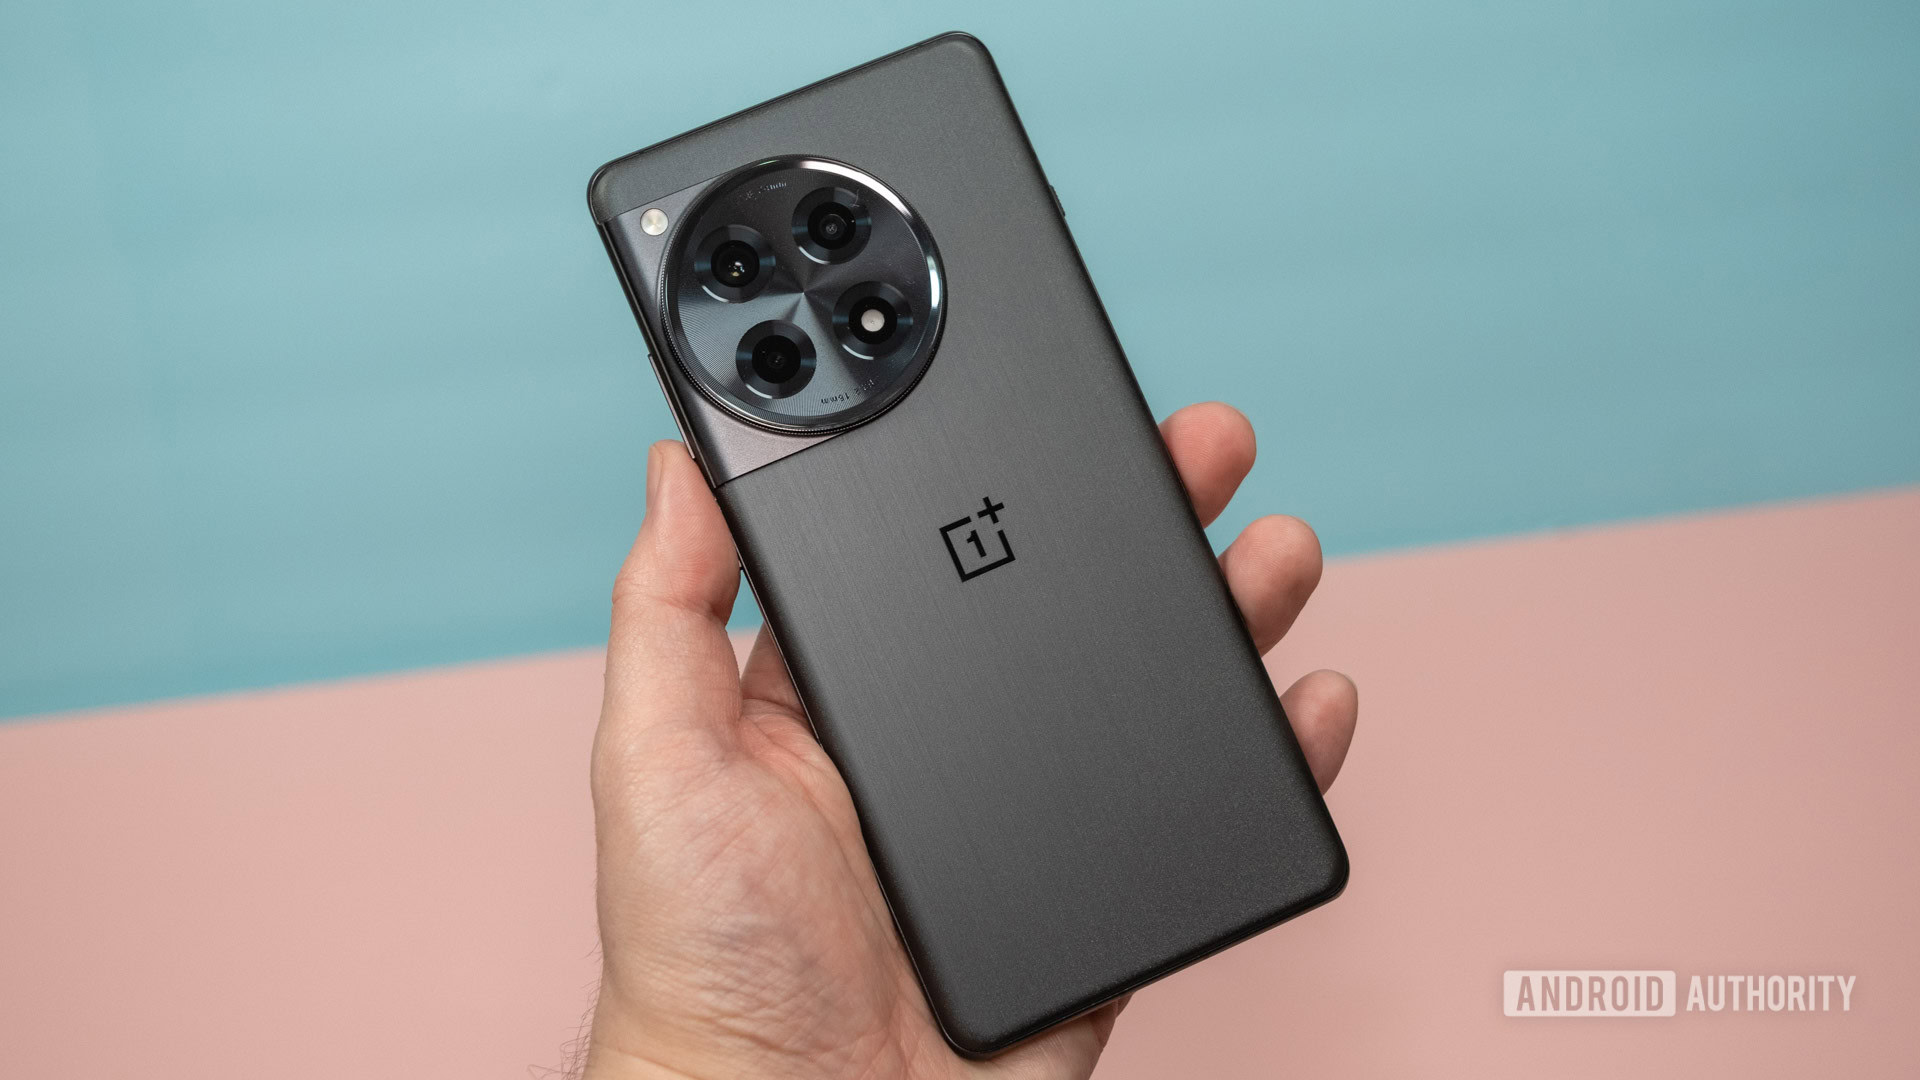 OnePlus has suffered a huge sales blow in its most important market